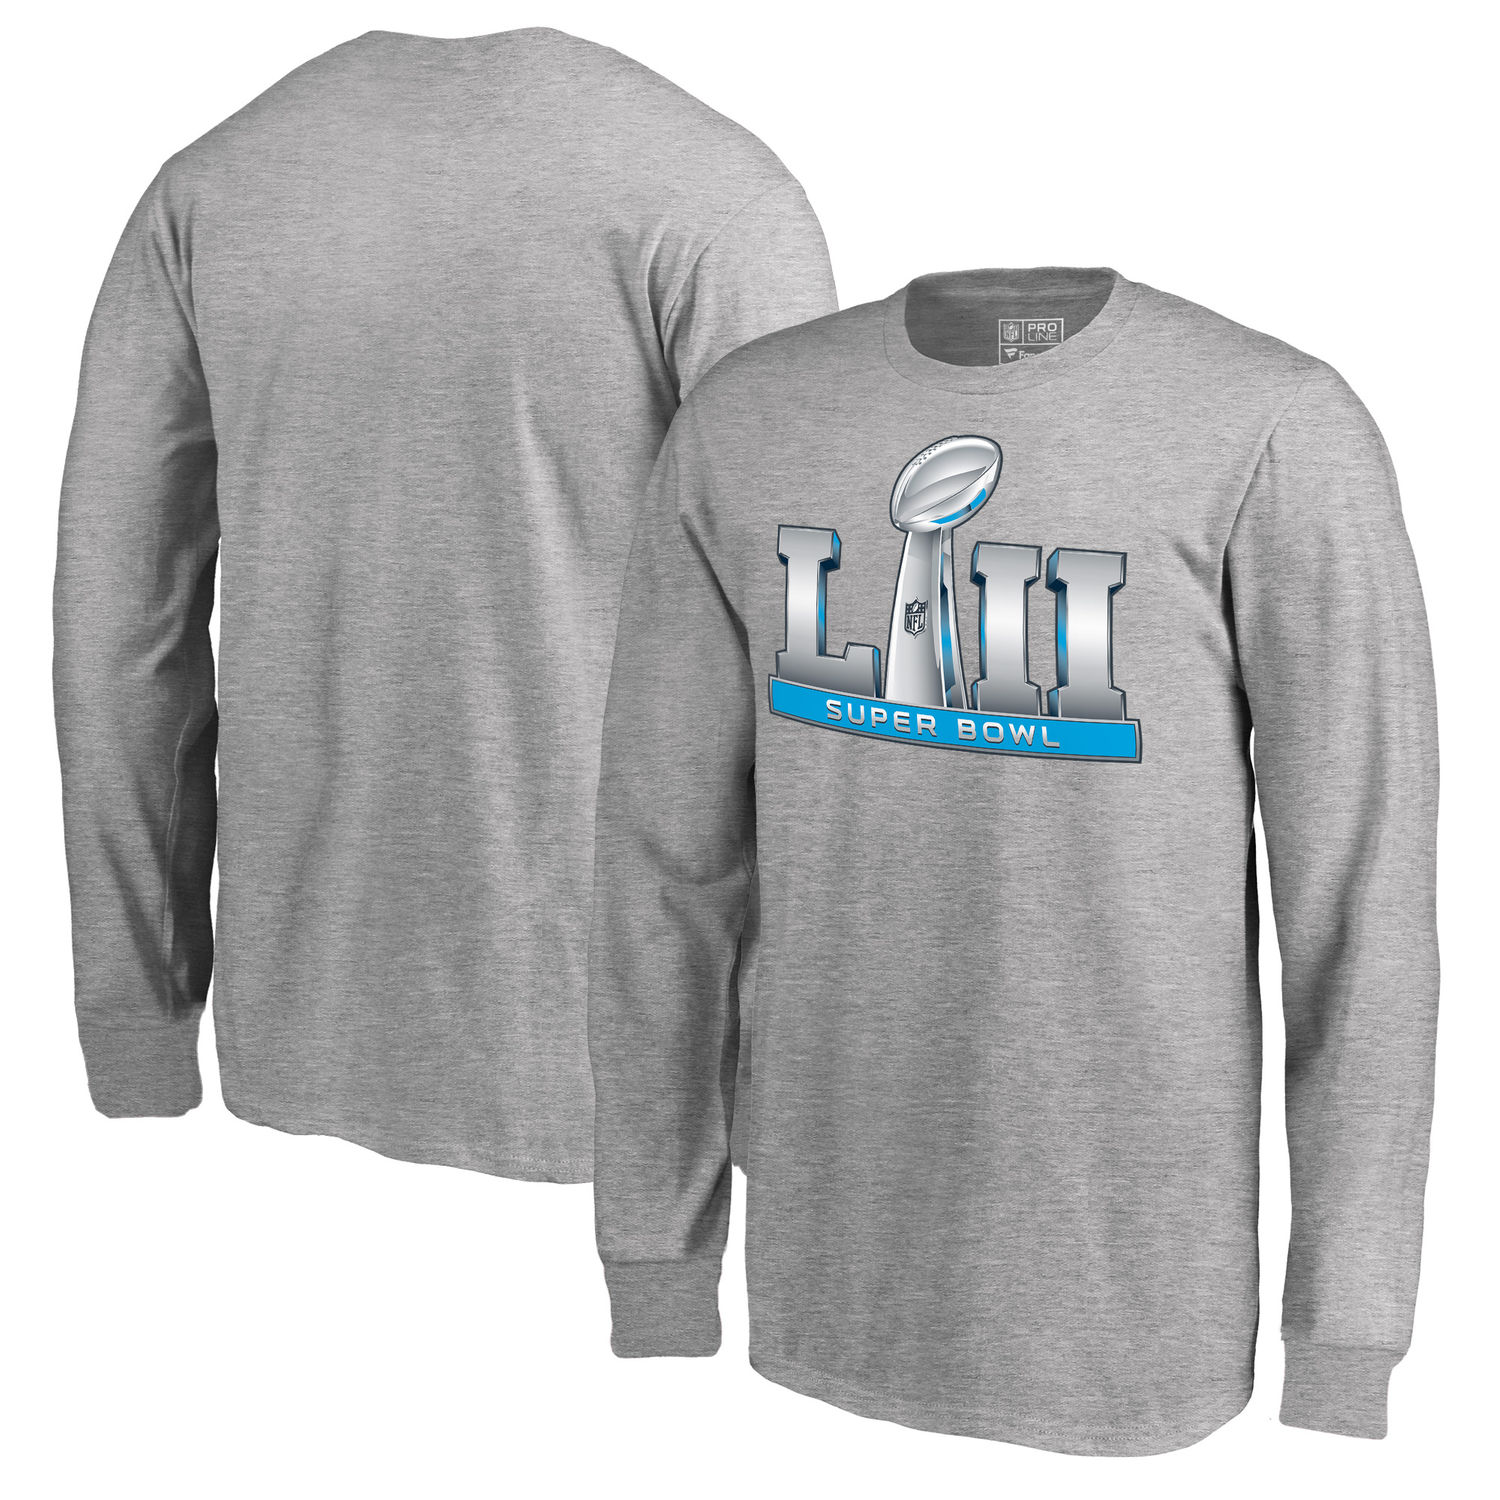 Youth NFL Pro Line by Fanatics Branded Heather Gray Super Bowl LII Event Long Sleeve T Shirt